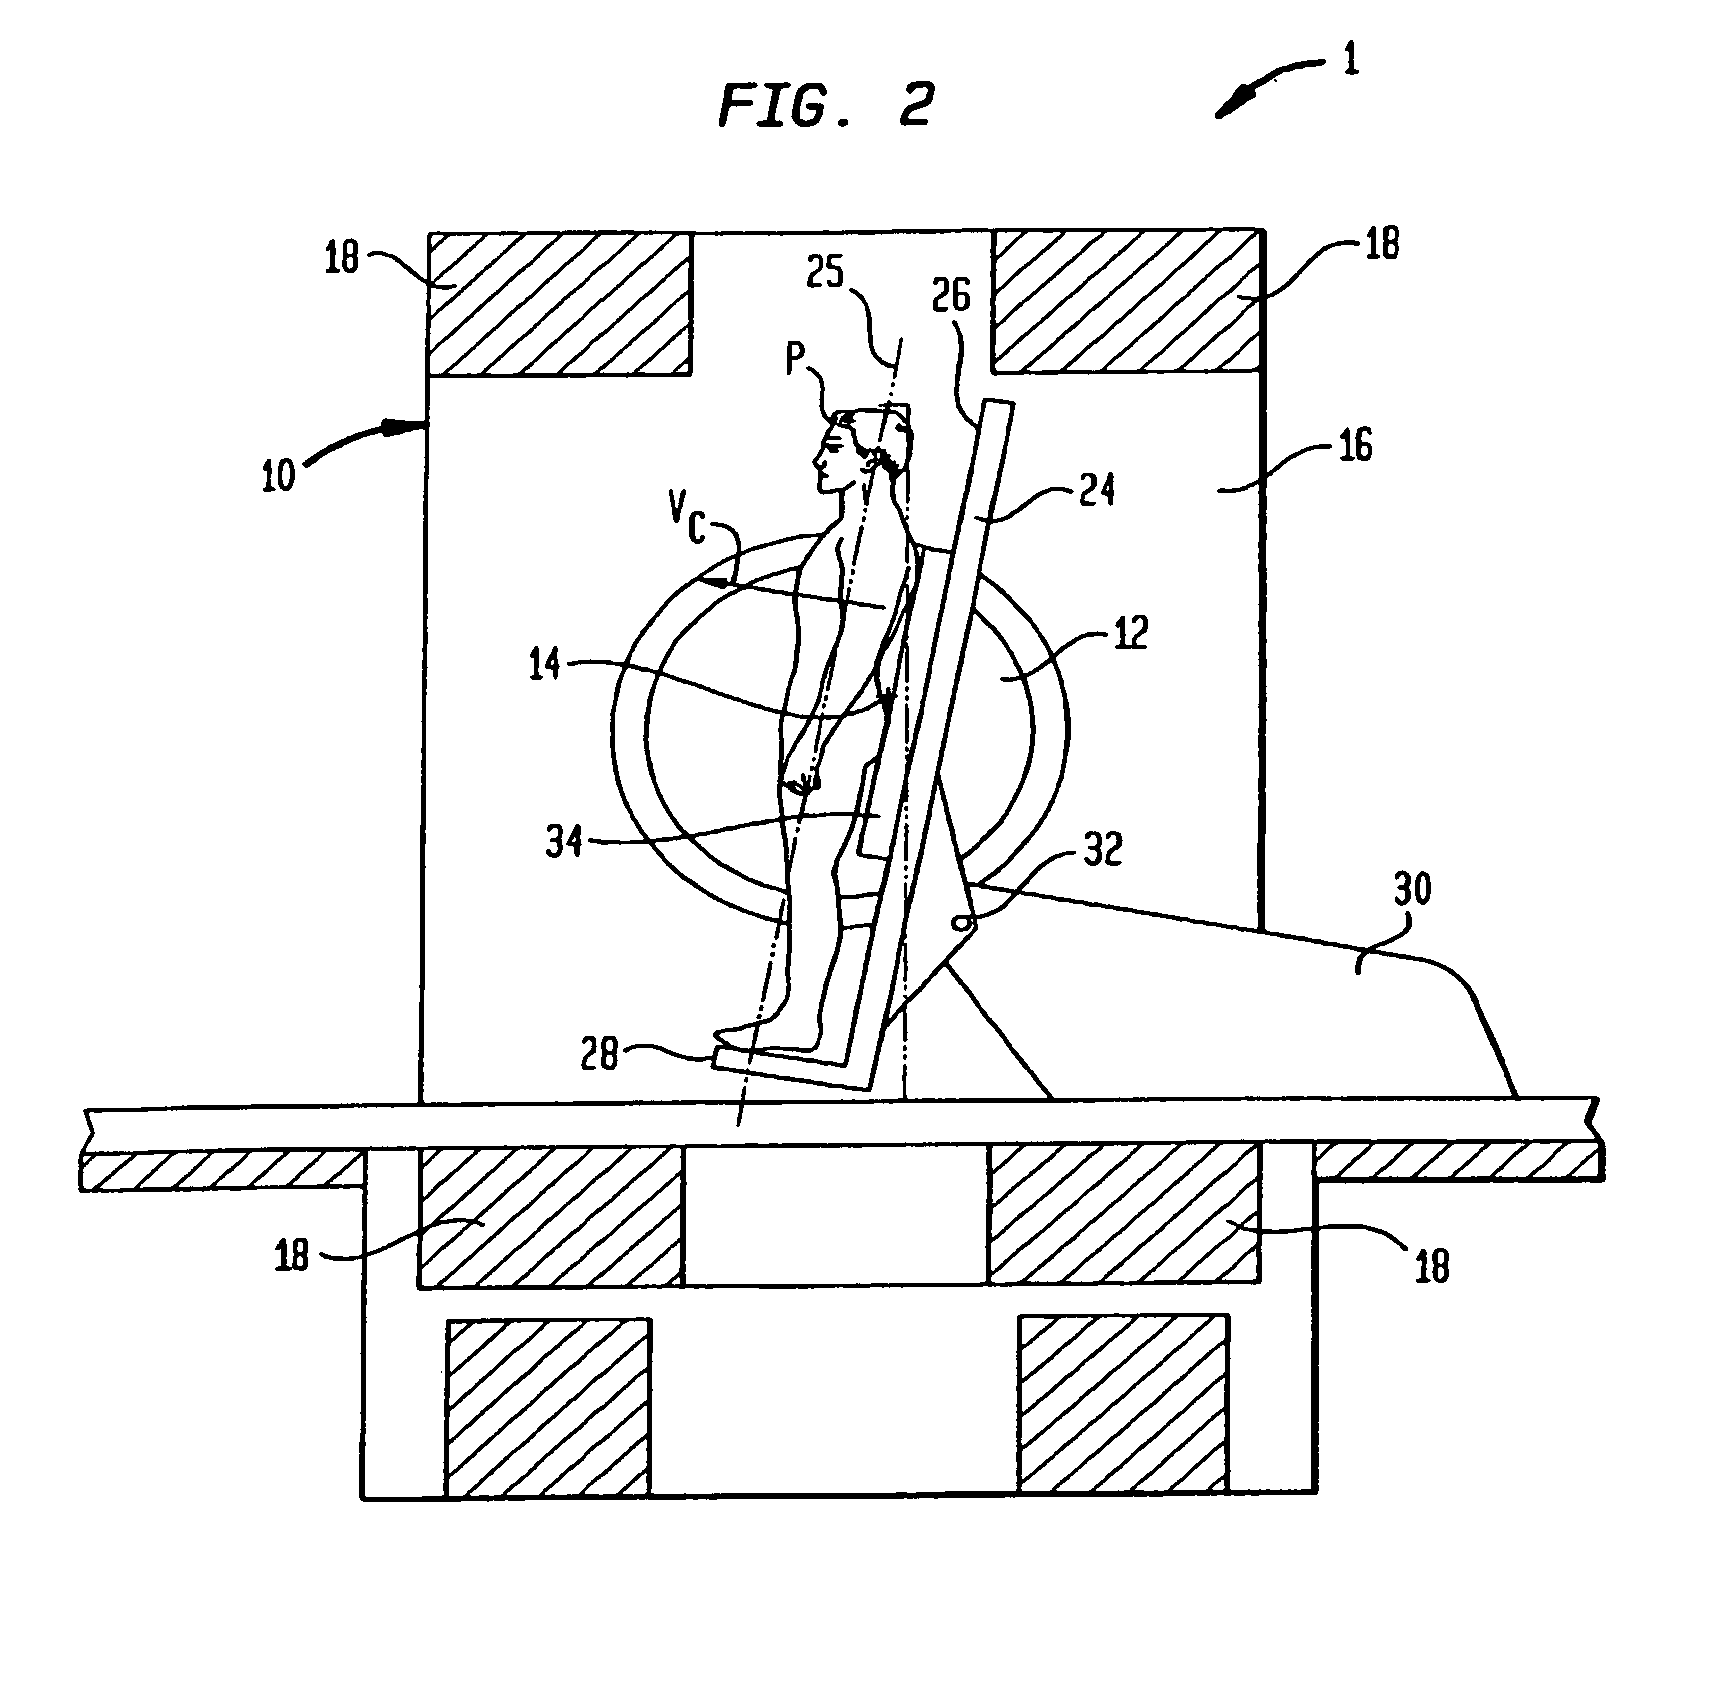 Coils for horizontal field magnetic resonance imaging